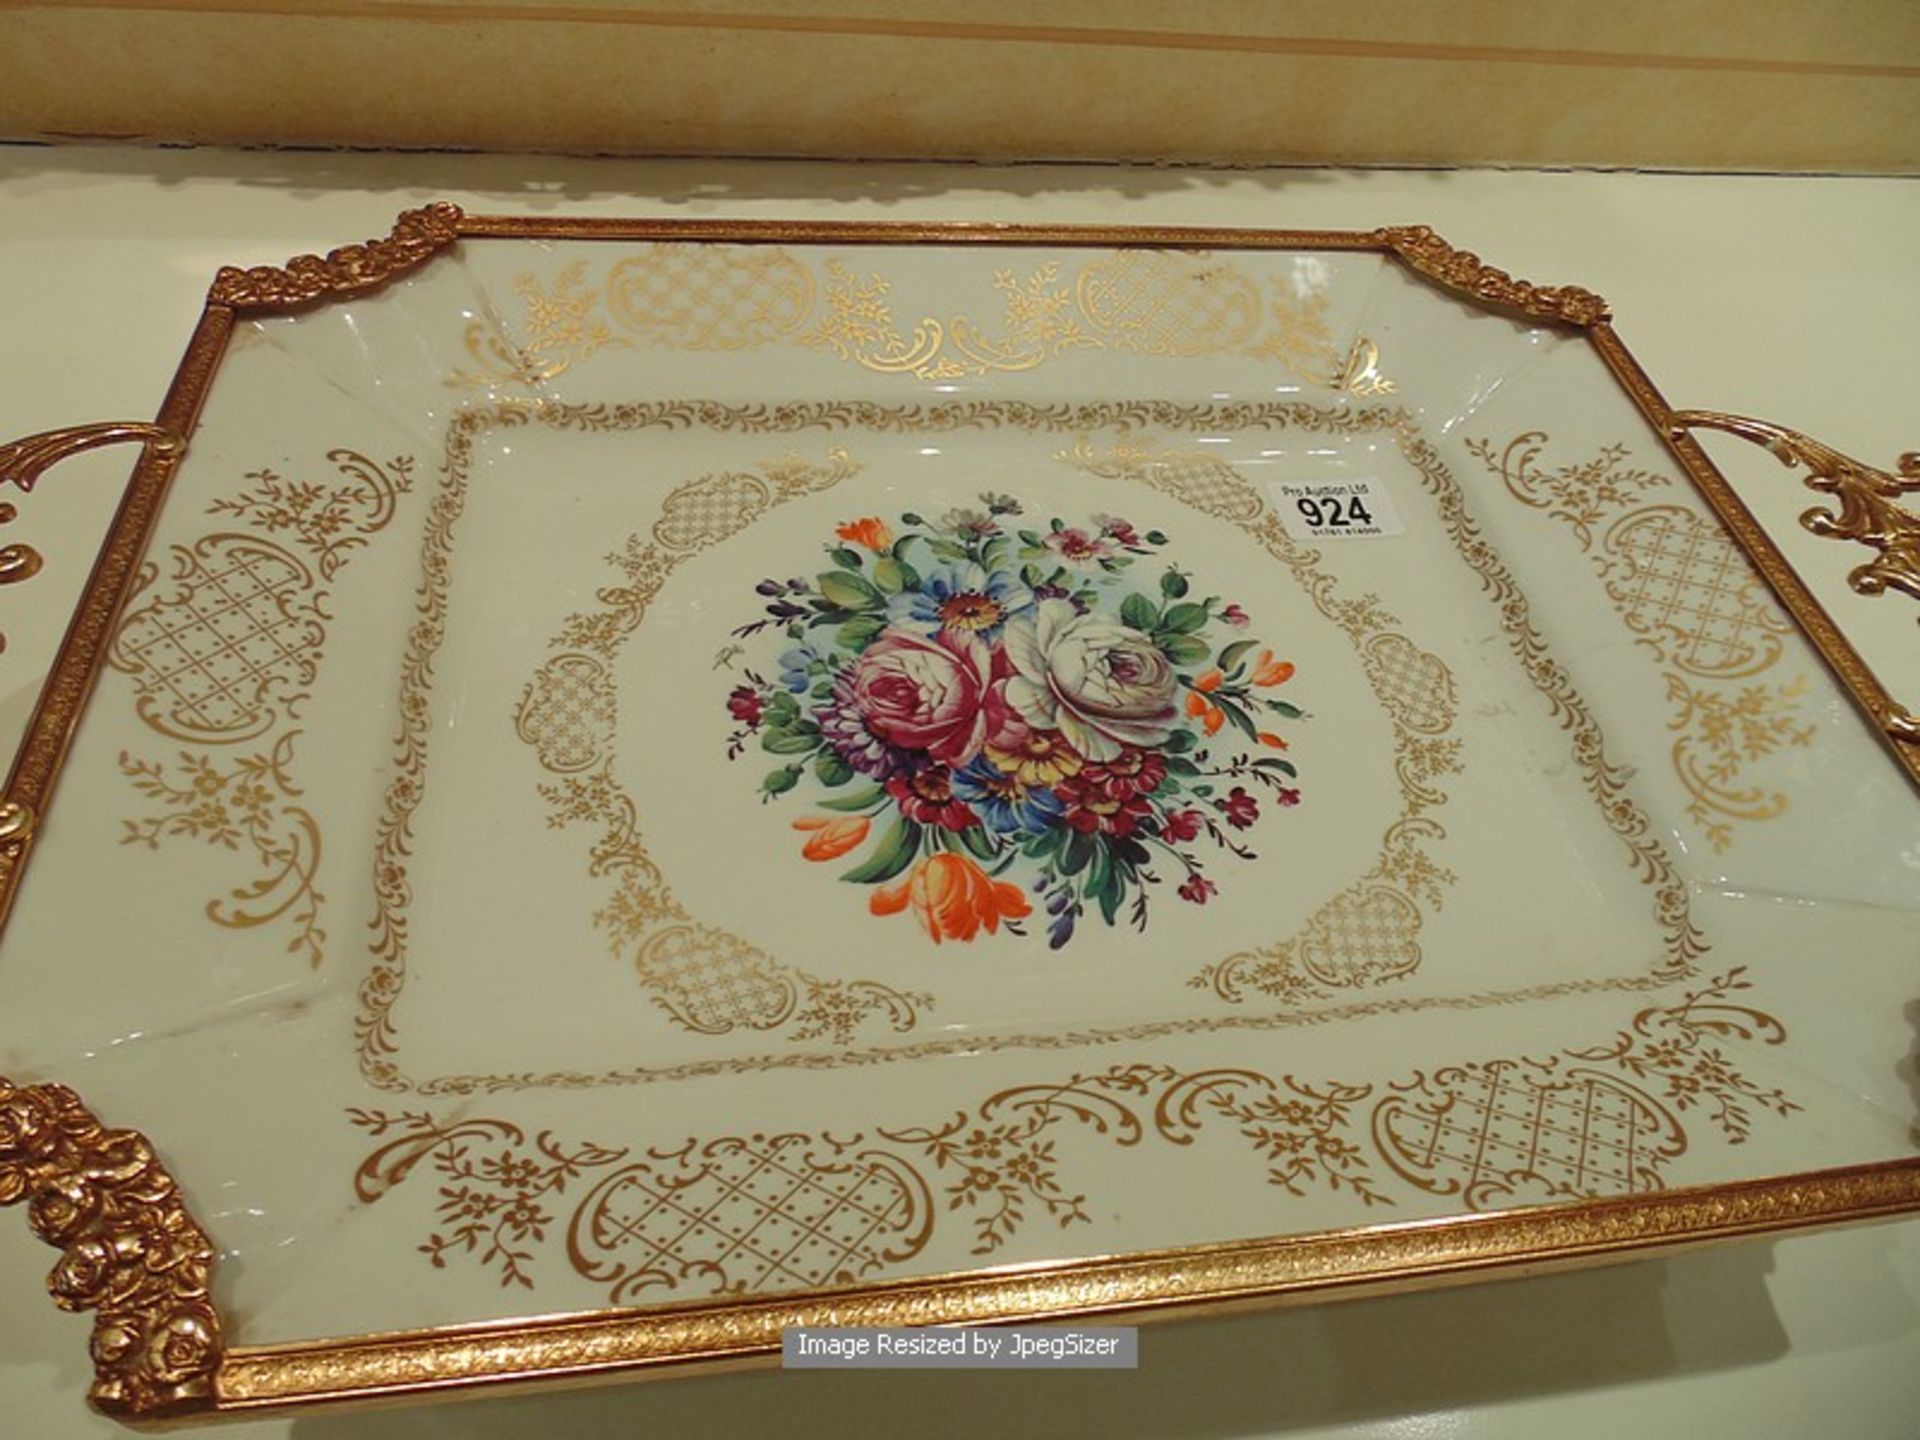 Limoges platter 520mm x 320mm x 80mm with a gold leaf carved pattern edge - Image 2 of 3